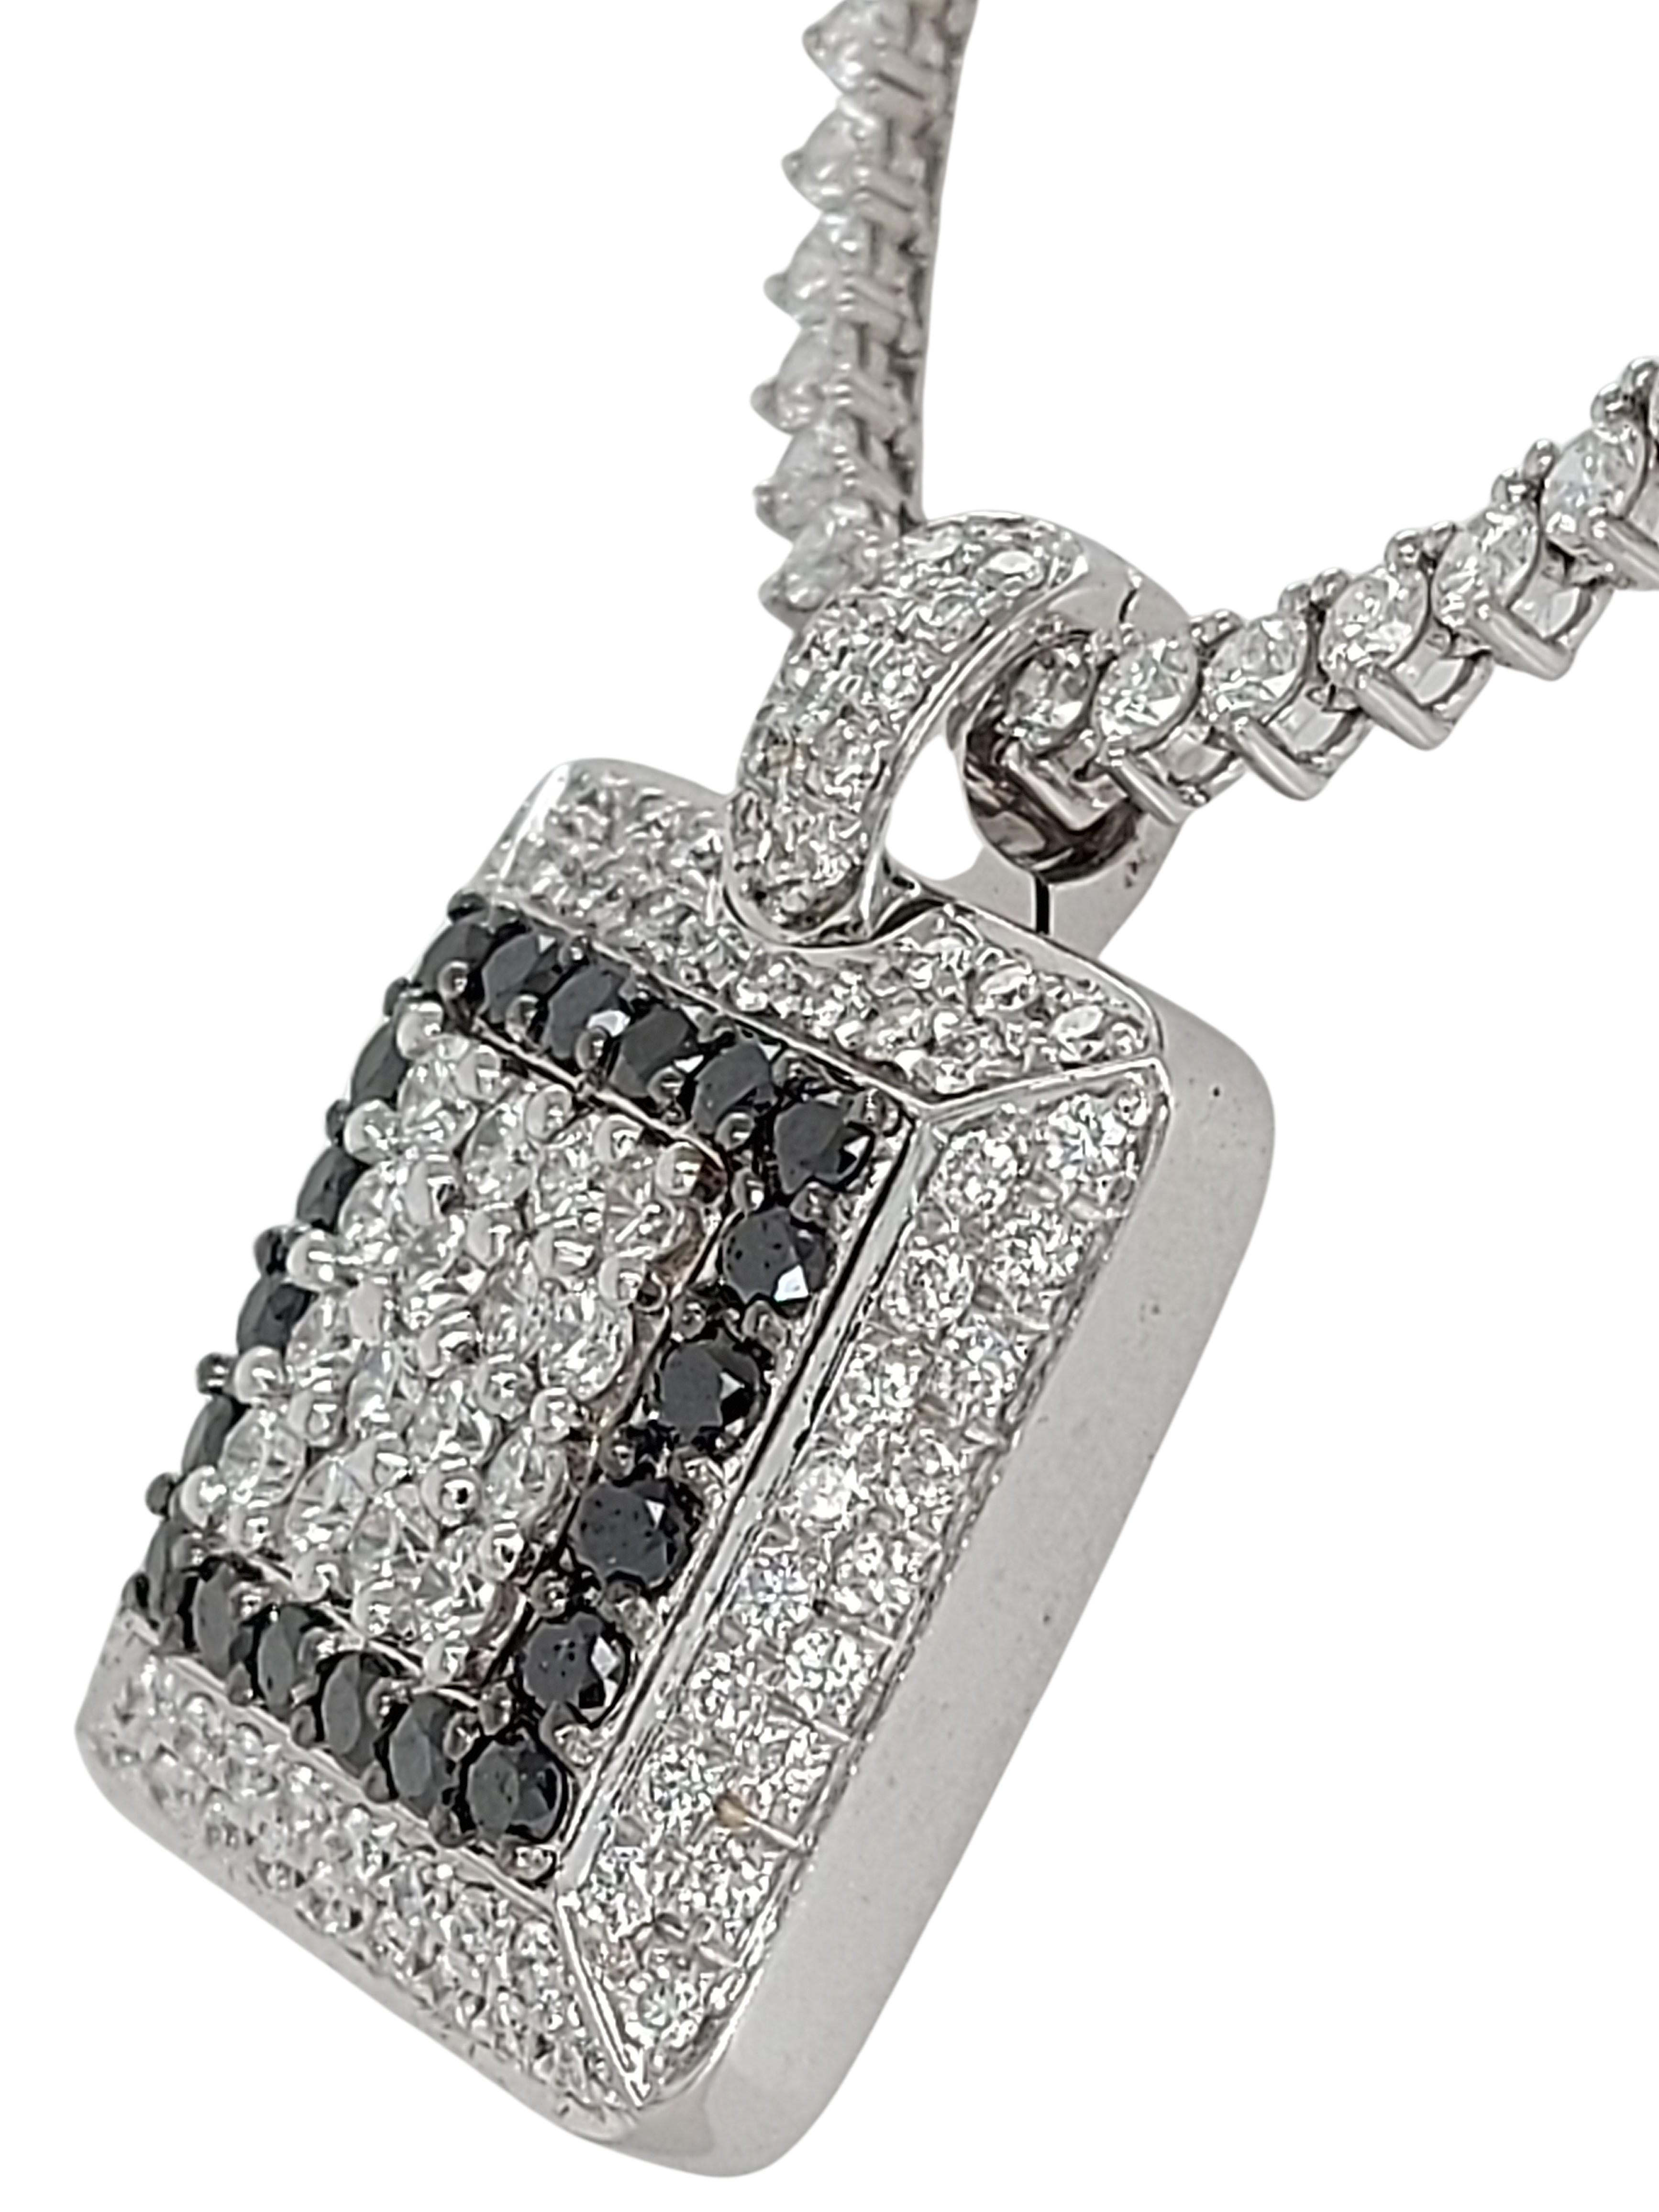 Leo Pizzo 18kt white gold necklace with 12.04 carat black and white diamonds.

Diamonds: together circa 12.04 carat brilliant cut diamonds

Material: 18kt white gold

Measurements: Pendant: 23.2 mm x 30.2 mm, Diamond string necklace is 40 cm